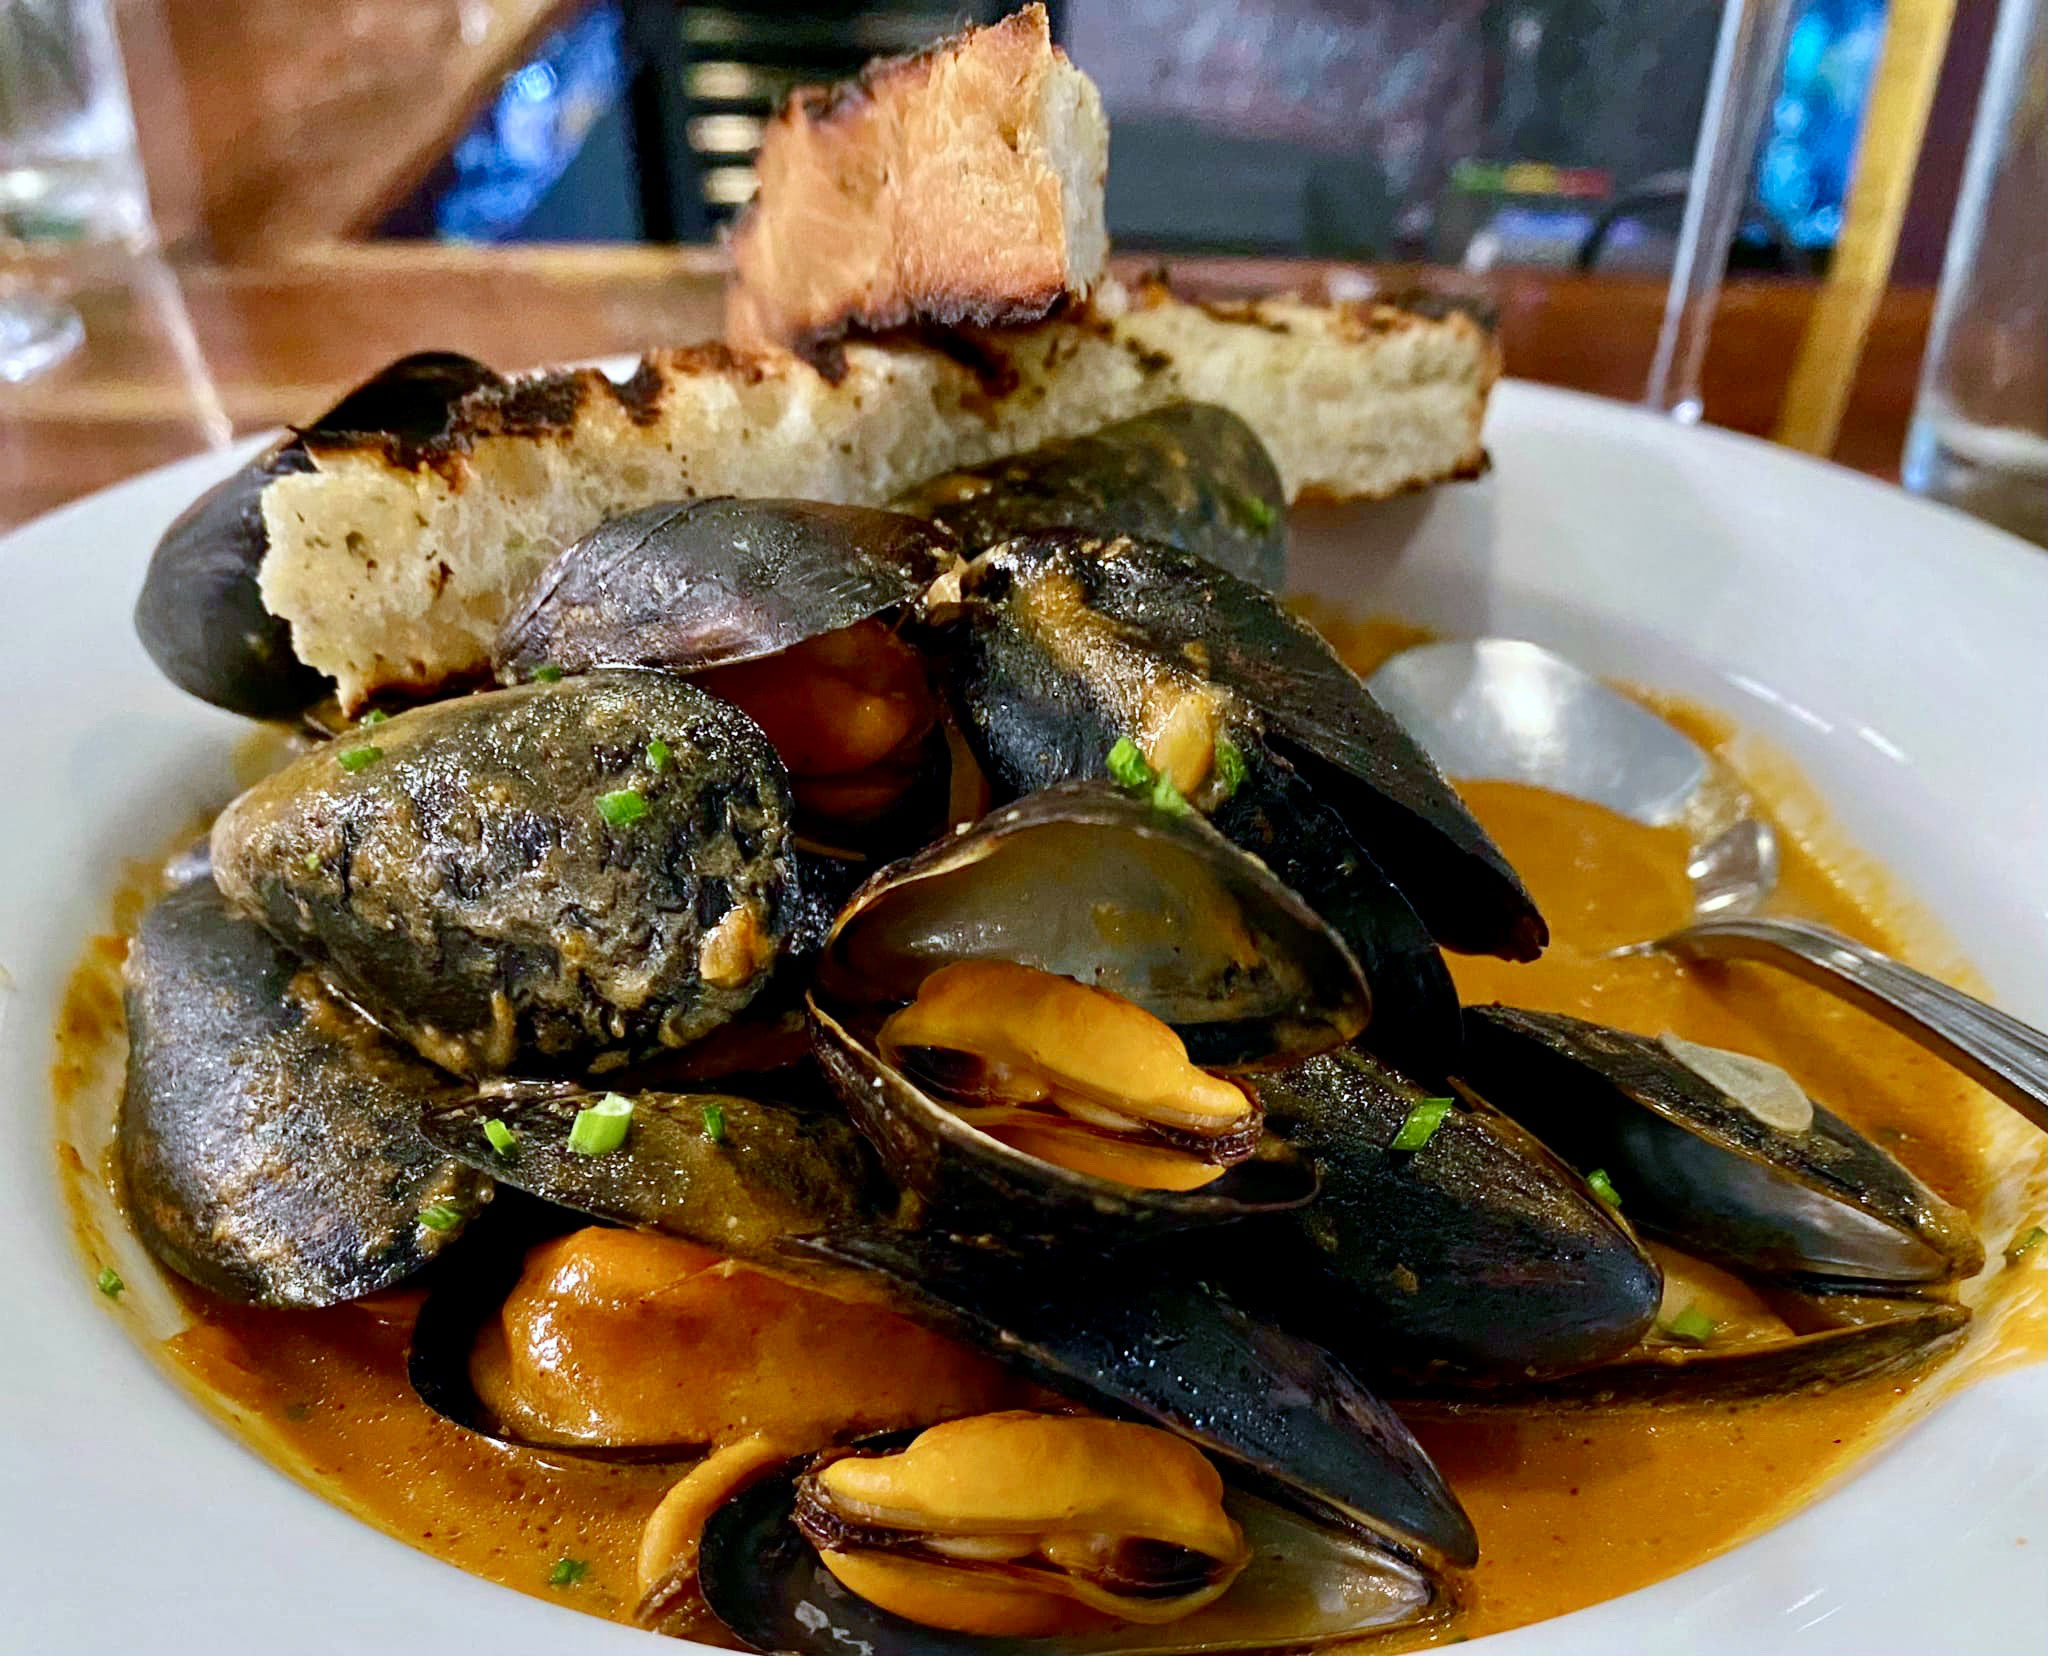 Curry P.E.I Mussels in a beautifully well balanced curry sauce. I dare you to not dip all of that crusted toast in that sauce! Wow! Mussels cooked to perfection.